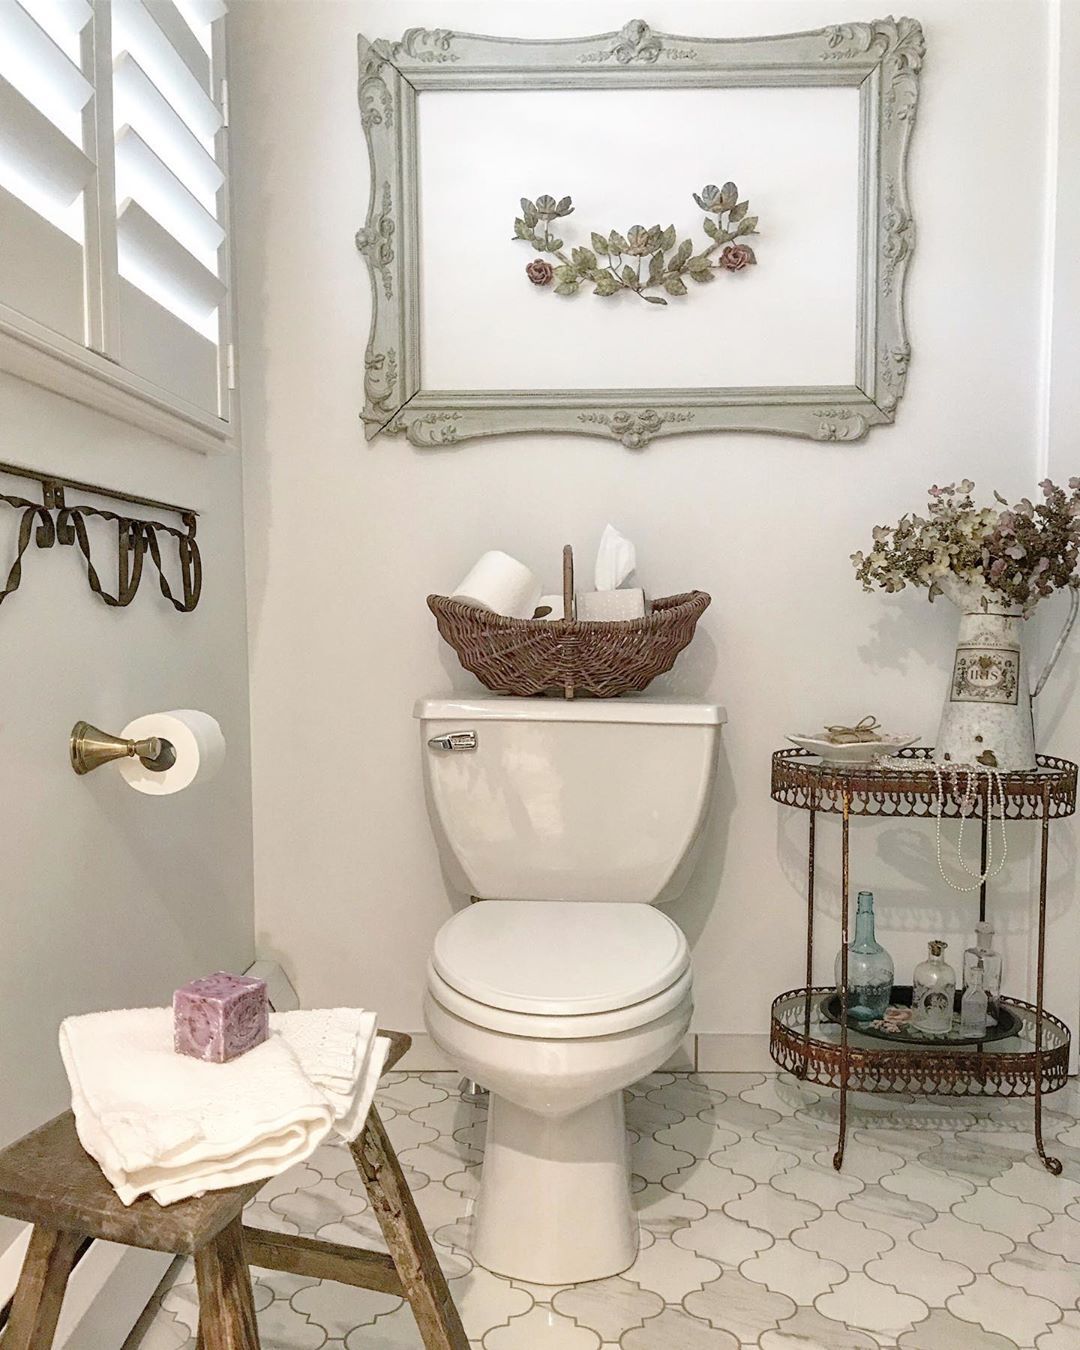 French Country Bathroom with Wicker Basket for Toilet Paper via @rarecorners